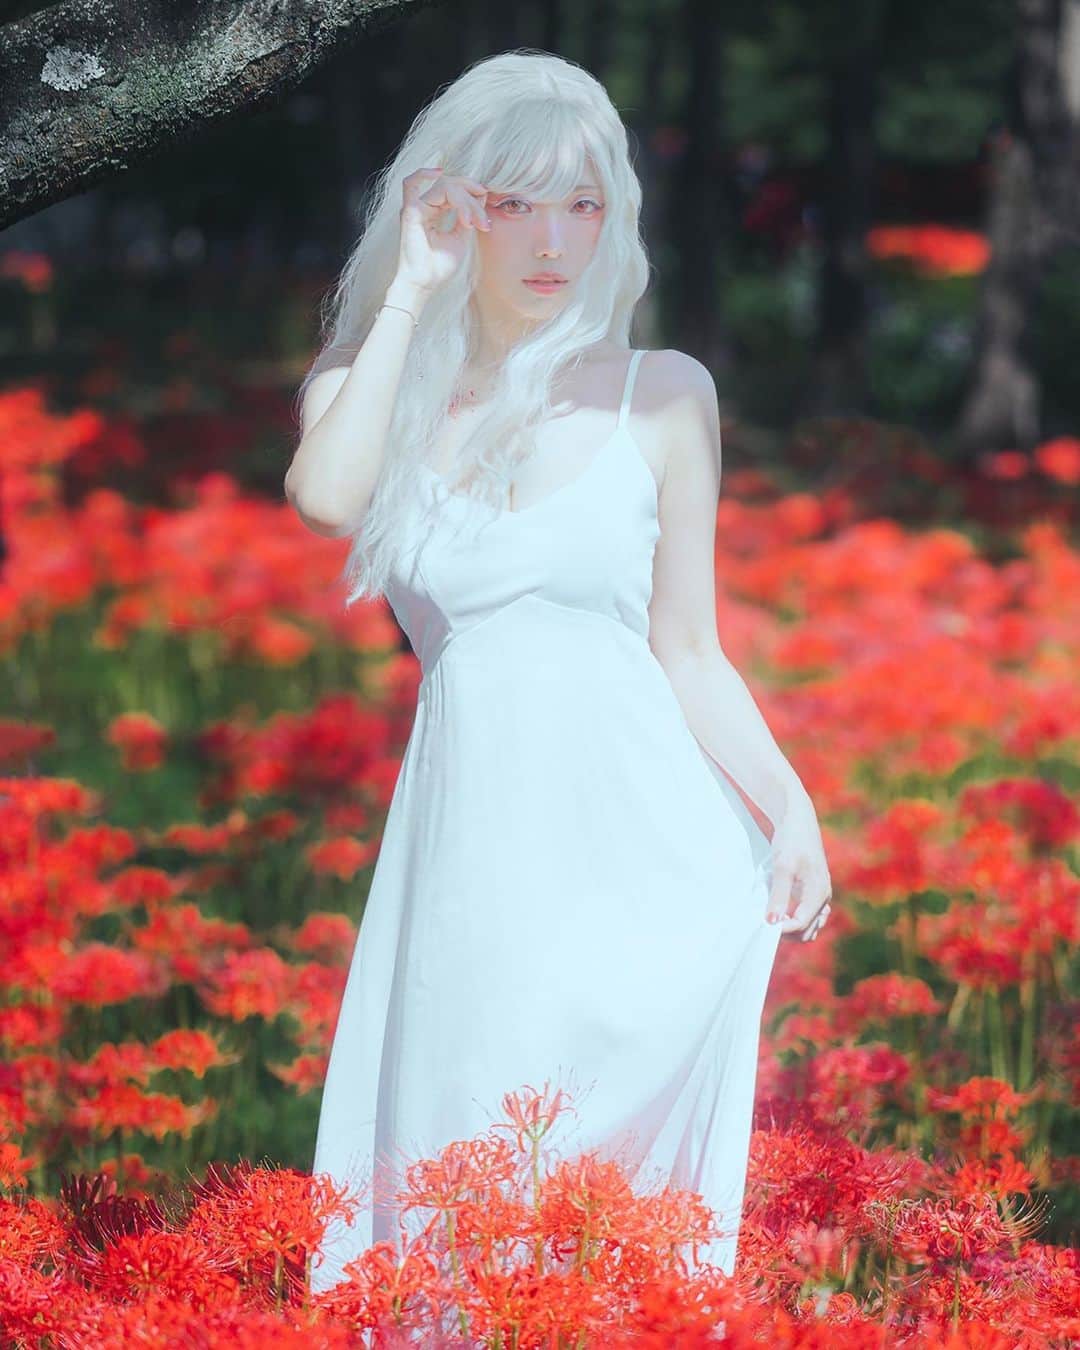 Elyのインスタグラム：「Most of the impression I have of the spider lily is that they are a vibrant red.  There are also pure white spider lily, and the contrast between the red and white is truly incredibly beautiful.  Full 21p in this month set B💌  ✧～✧～✧ 印象の中で彼岸花のほとんどは鮮やかな赤色です。 純白の彼岸花もあり、赤と白のコントラストは本当に信じられないほど美しいです!  フル写真セット(21枚)は今月のBセットに収録されています💌  ✧～✧～✧ 印象中的彼岸花大多是鮮紅色的 另外也有純白色的彼岸花，相襯的紅與白真的美的不可思議✨  完整寫真組(21p)收錄在本月B組💌  #ely #elycosplay #original #spiderlily #彼岸花」